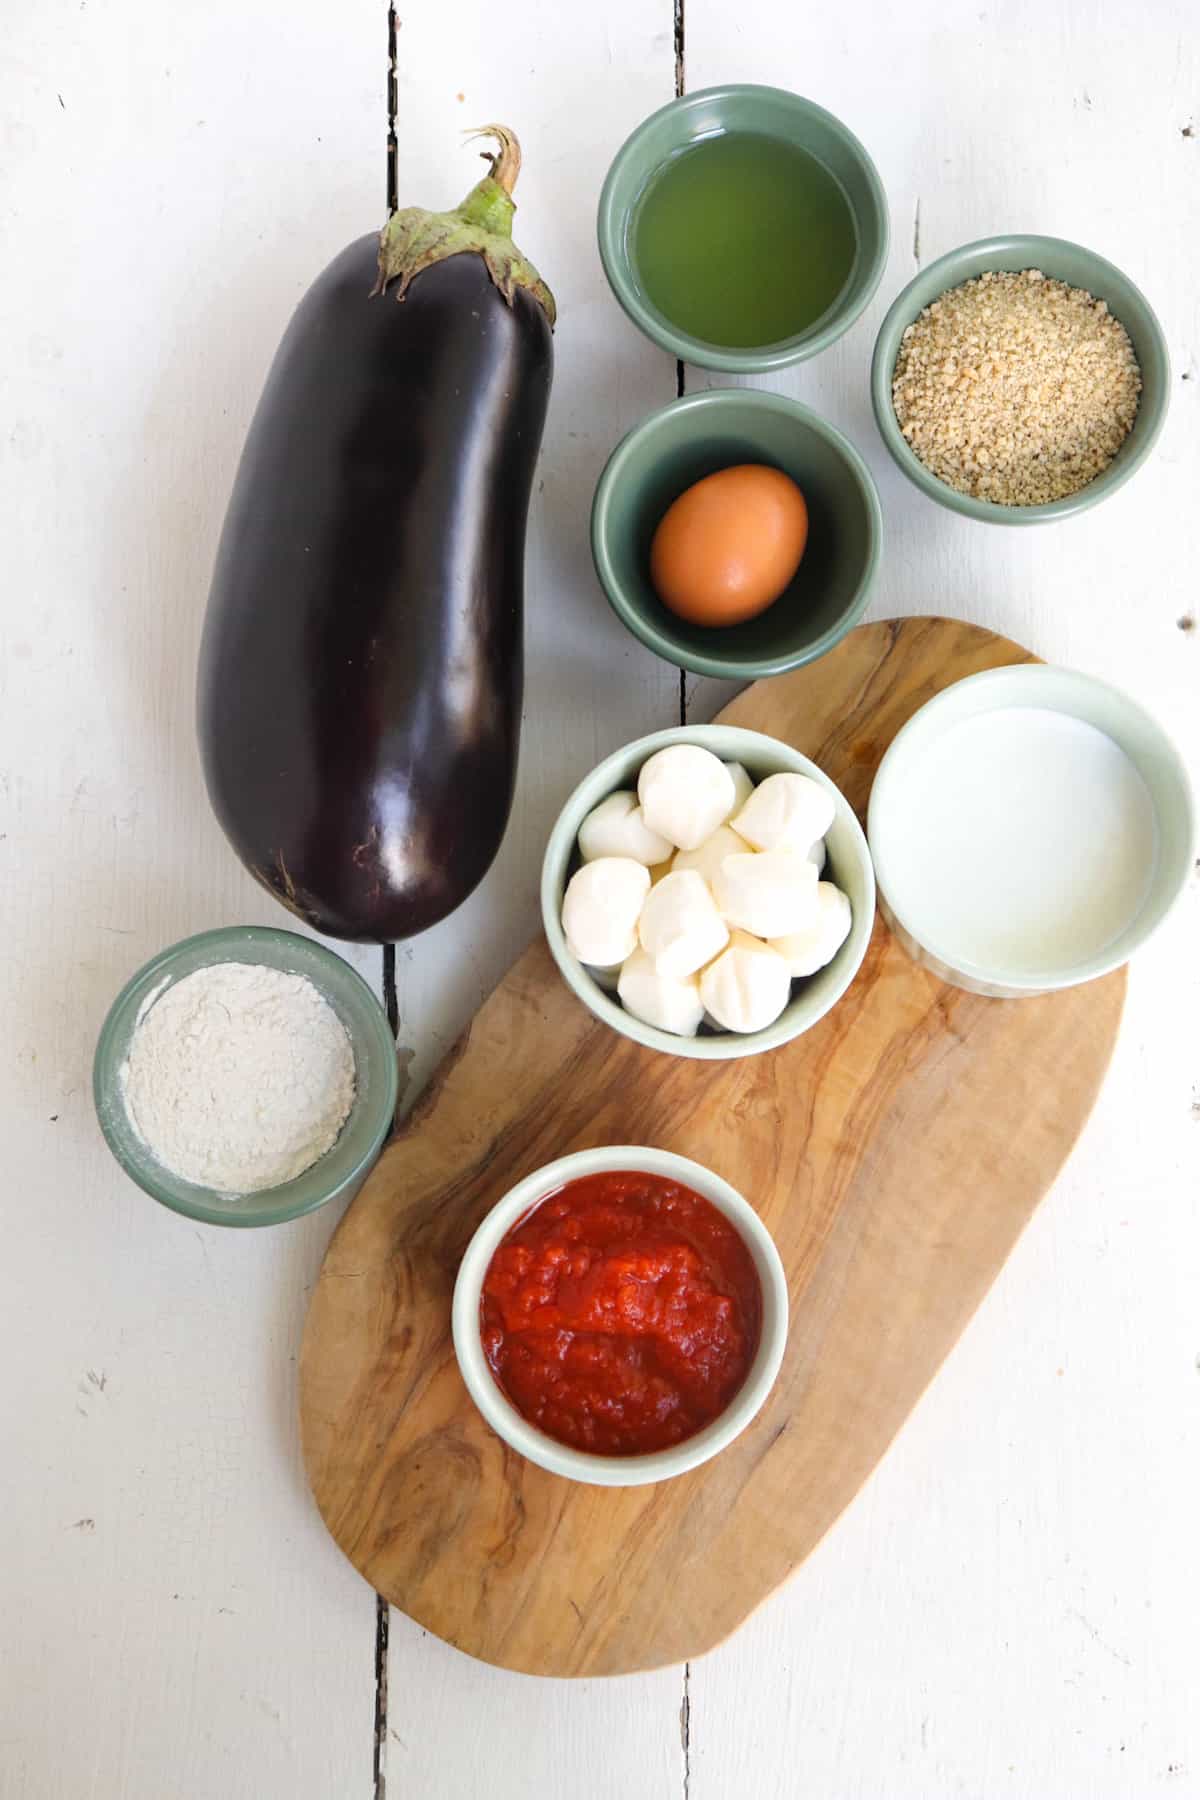 ingredients for olive garden eggplant parmesan on a white background.